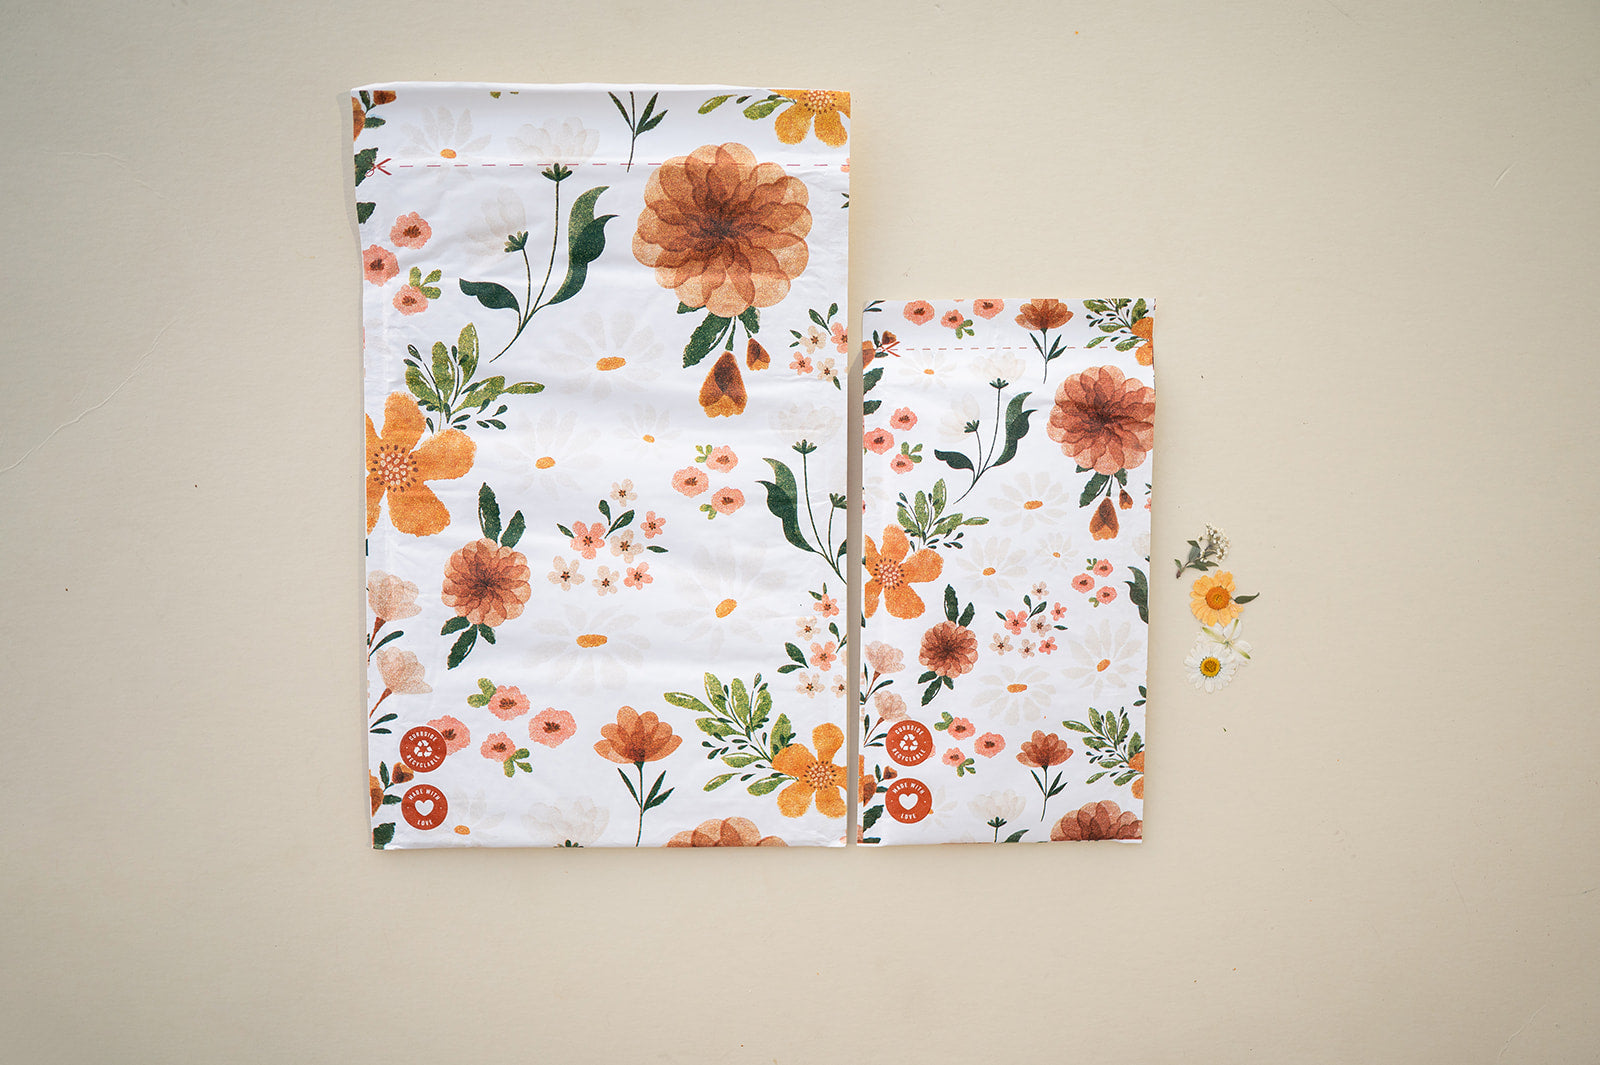 A Gardenlumina Padded Paper Mailer 6" x 9" from impack.co with orange and white flowers on it.